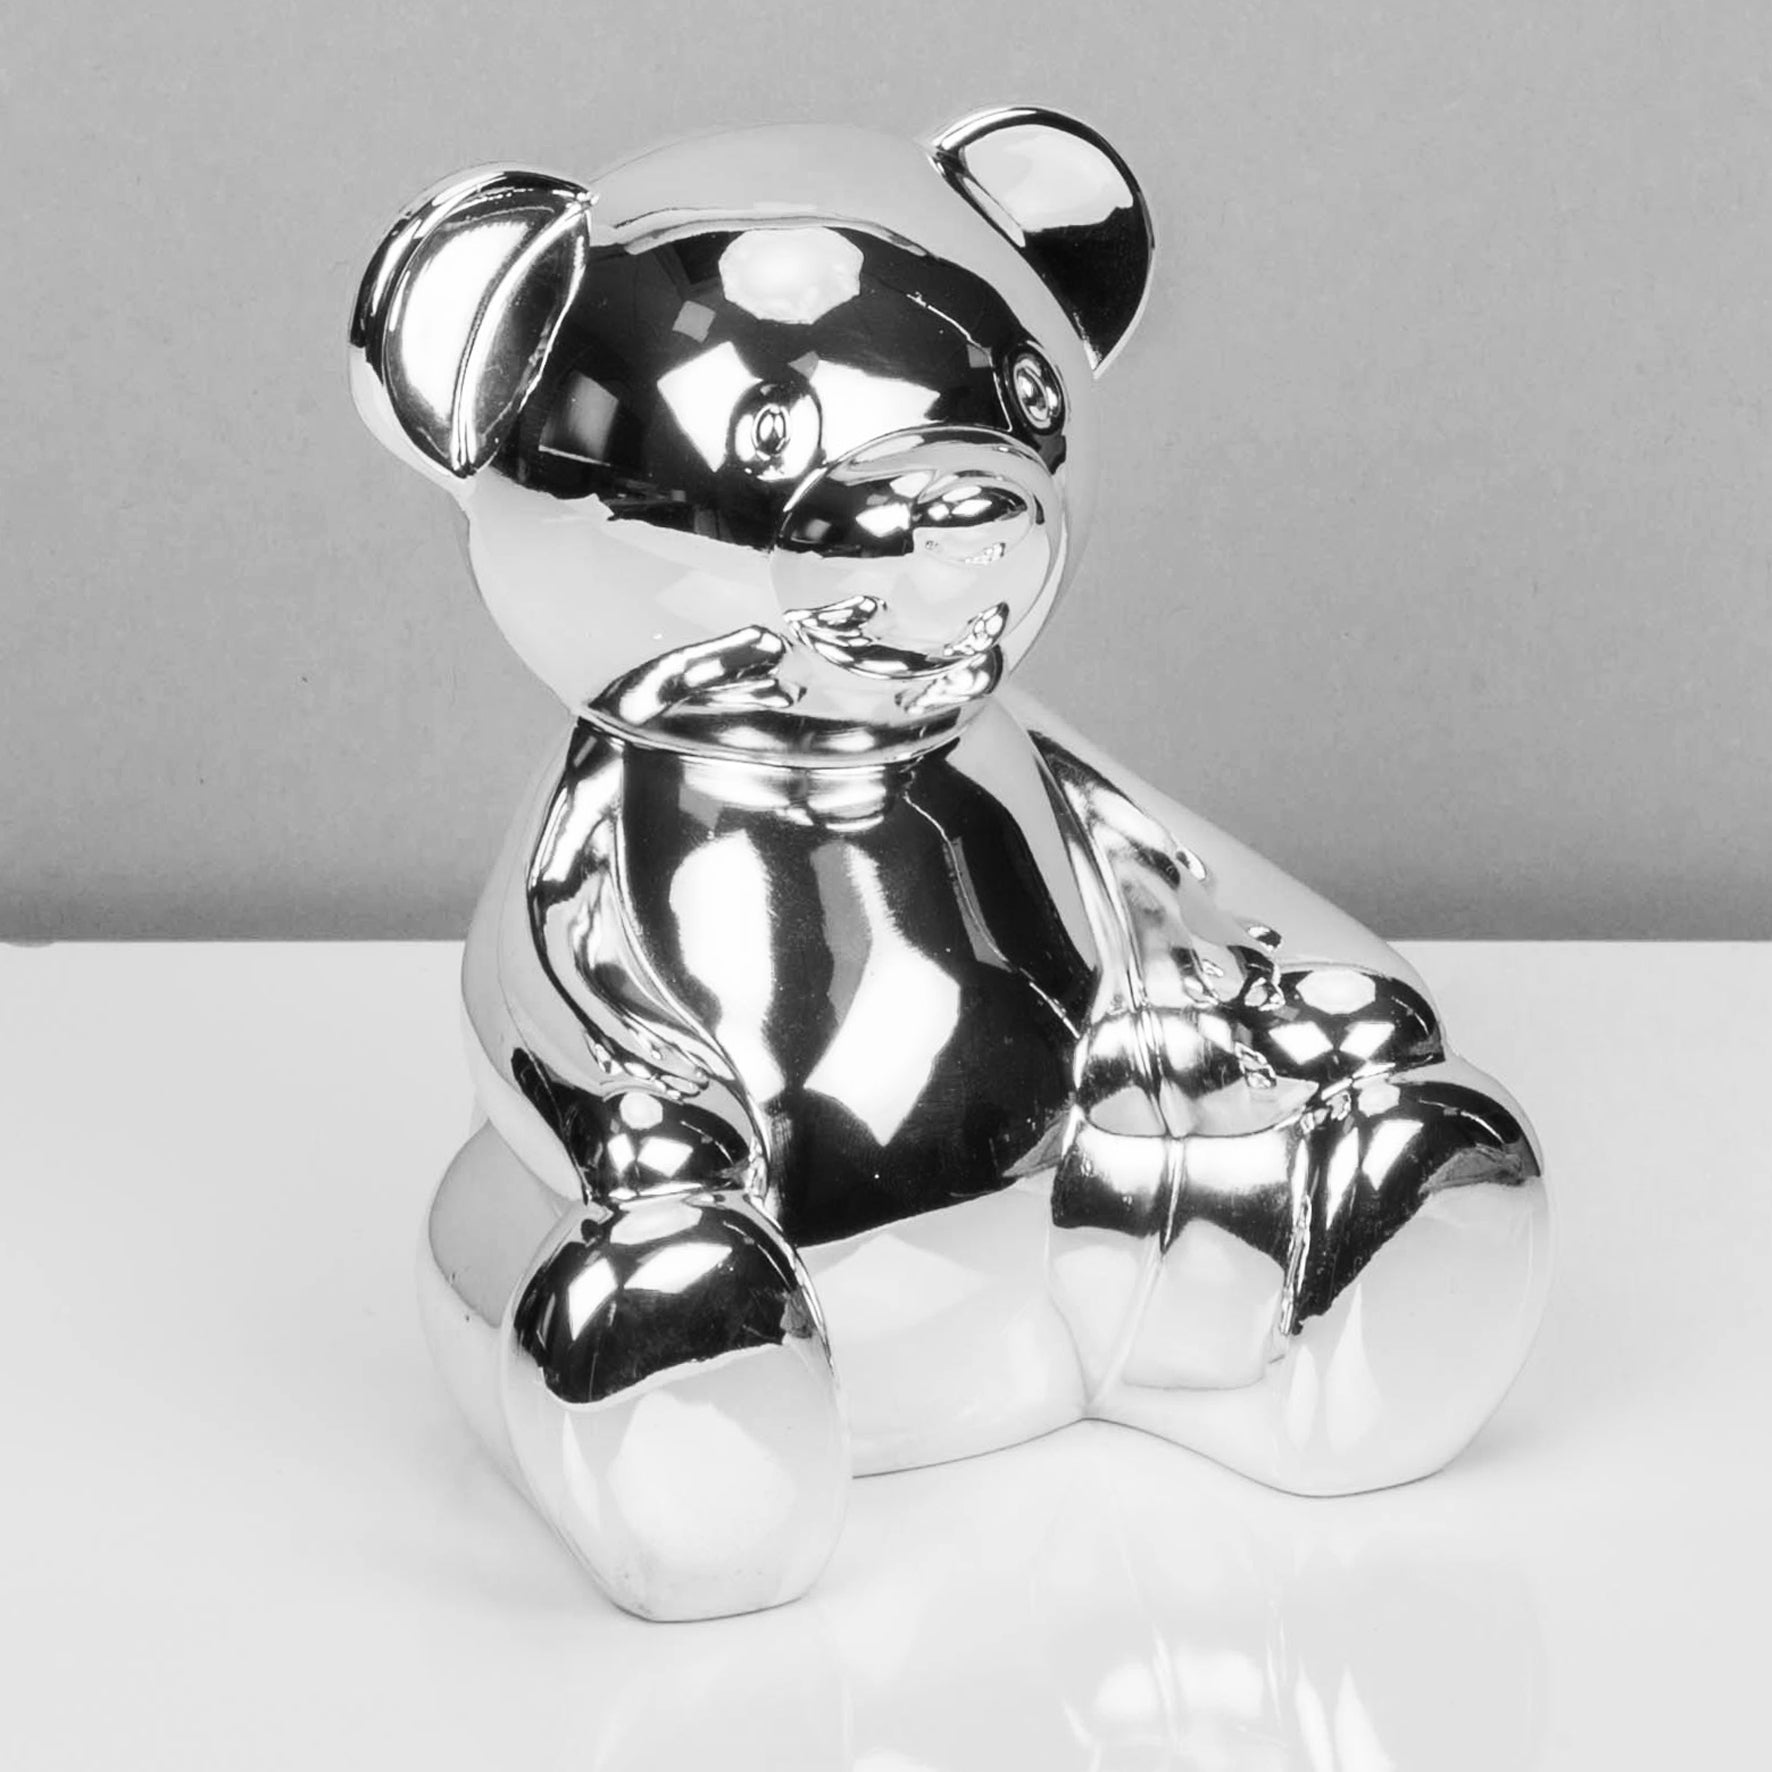 Silver plated teddy money box. with money slot and bung at base.